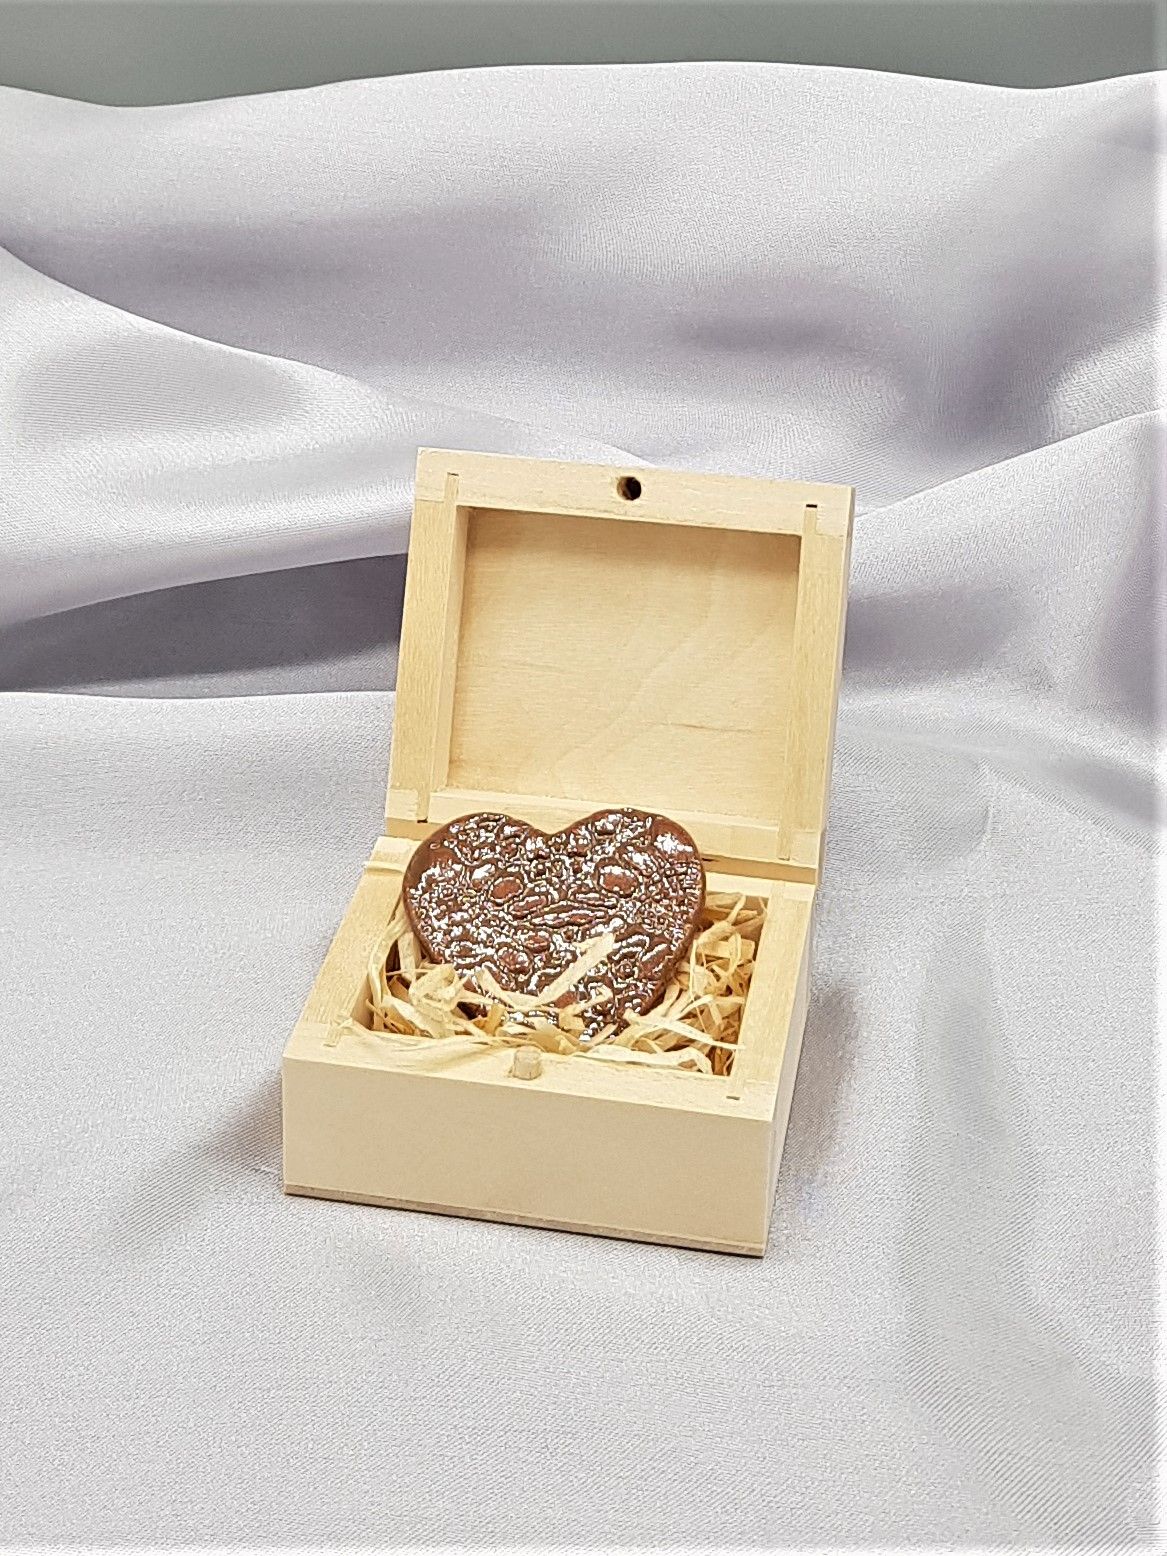 MAGNET HEART IN A WOODEN BOX